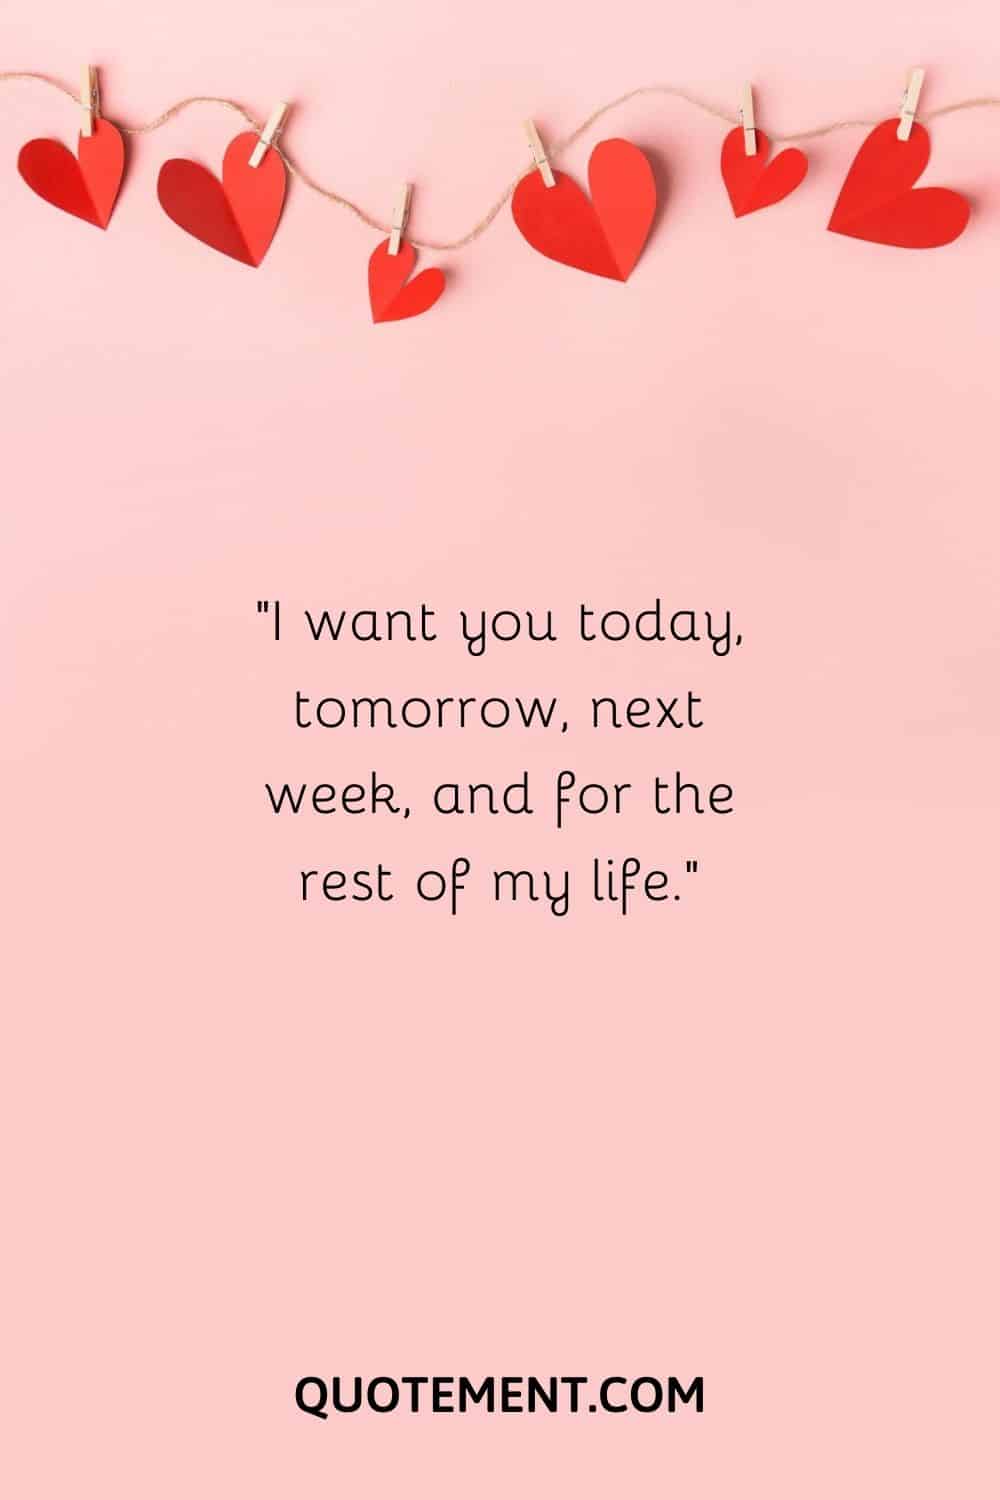 I want you today, tomorrow, next week, and for the rest of my life